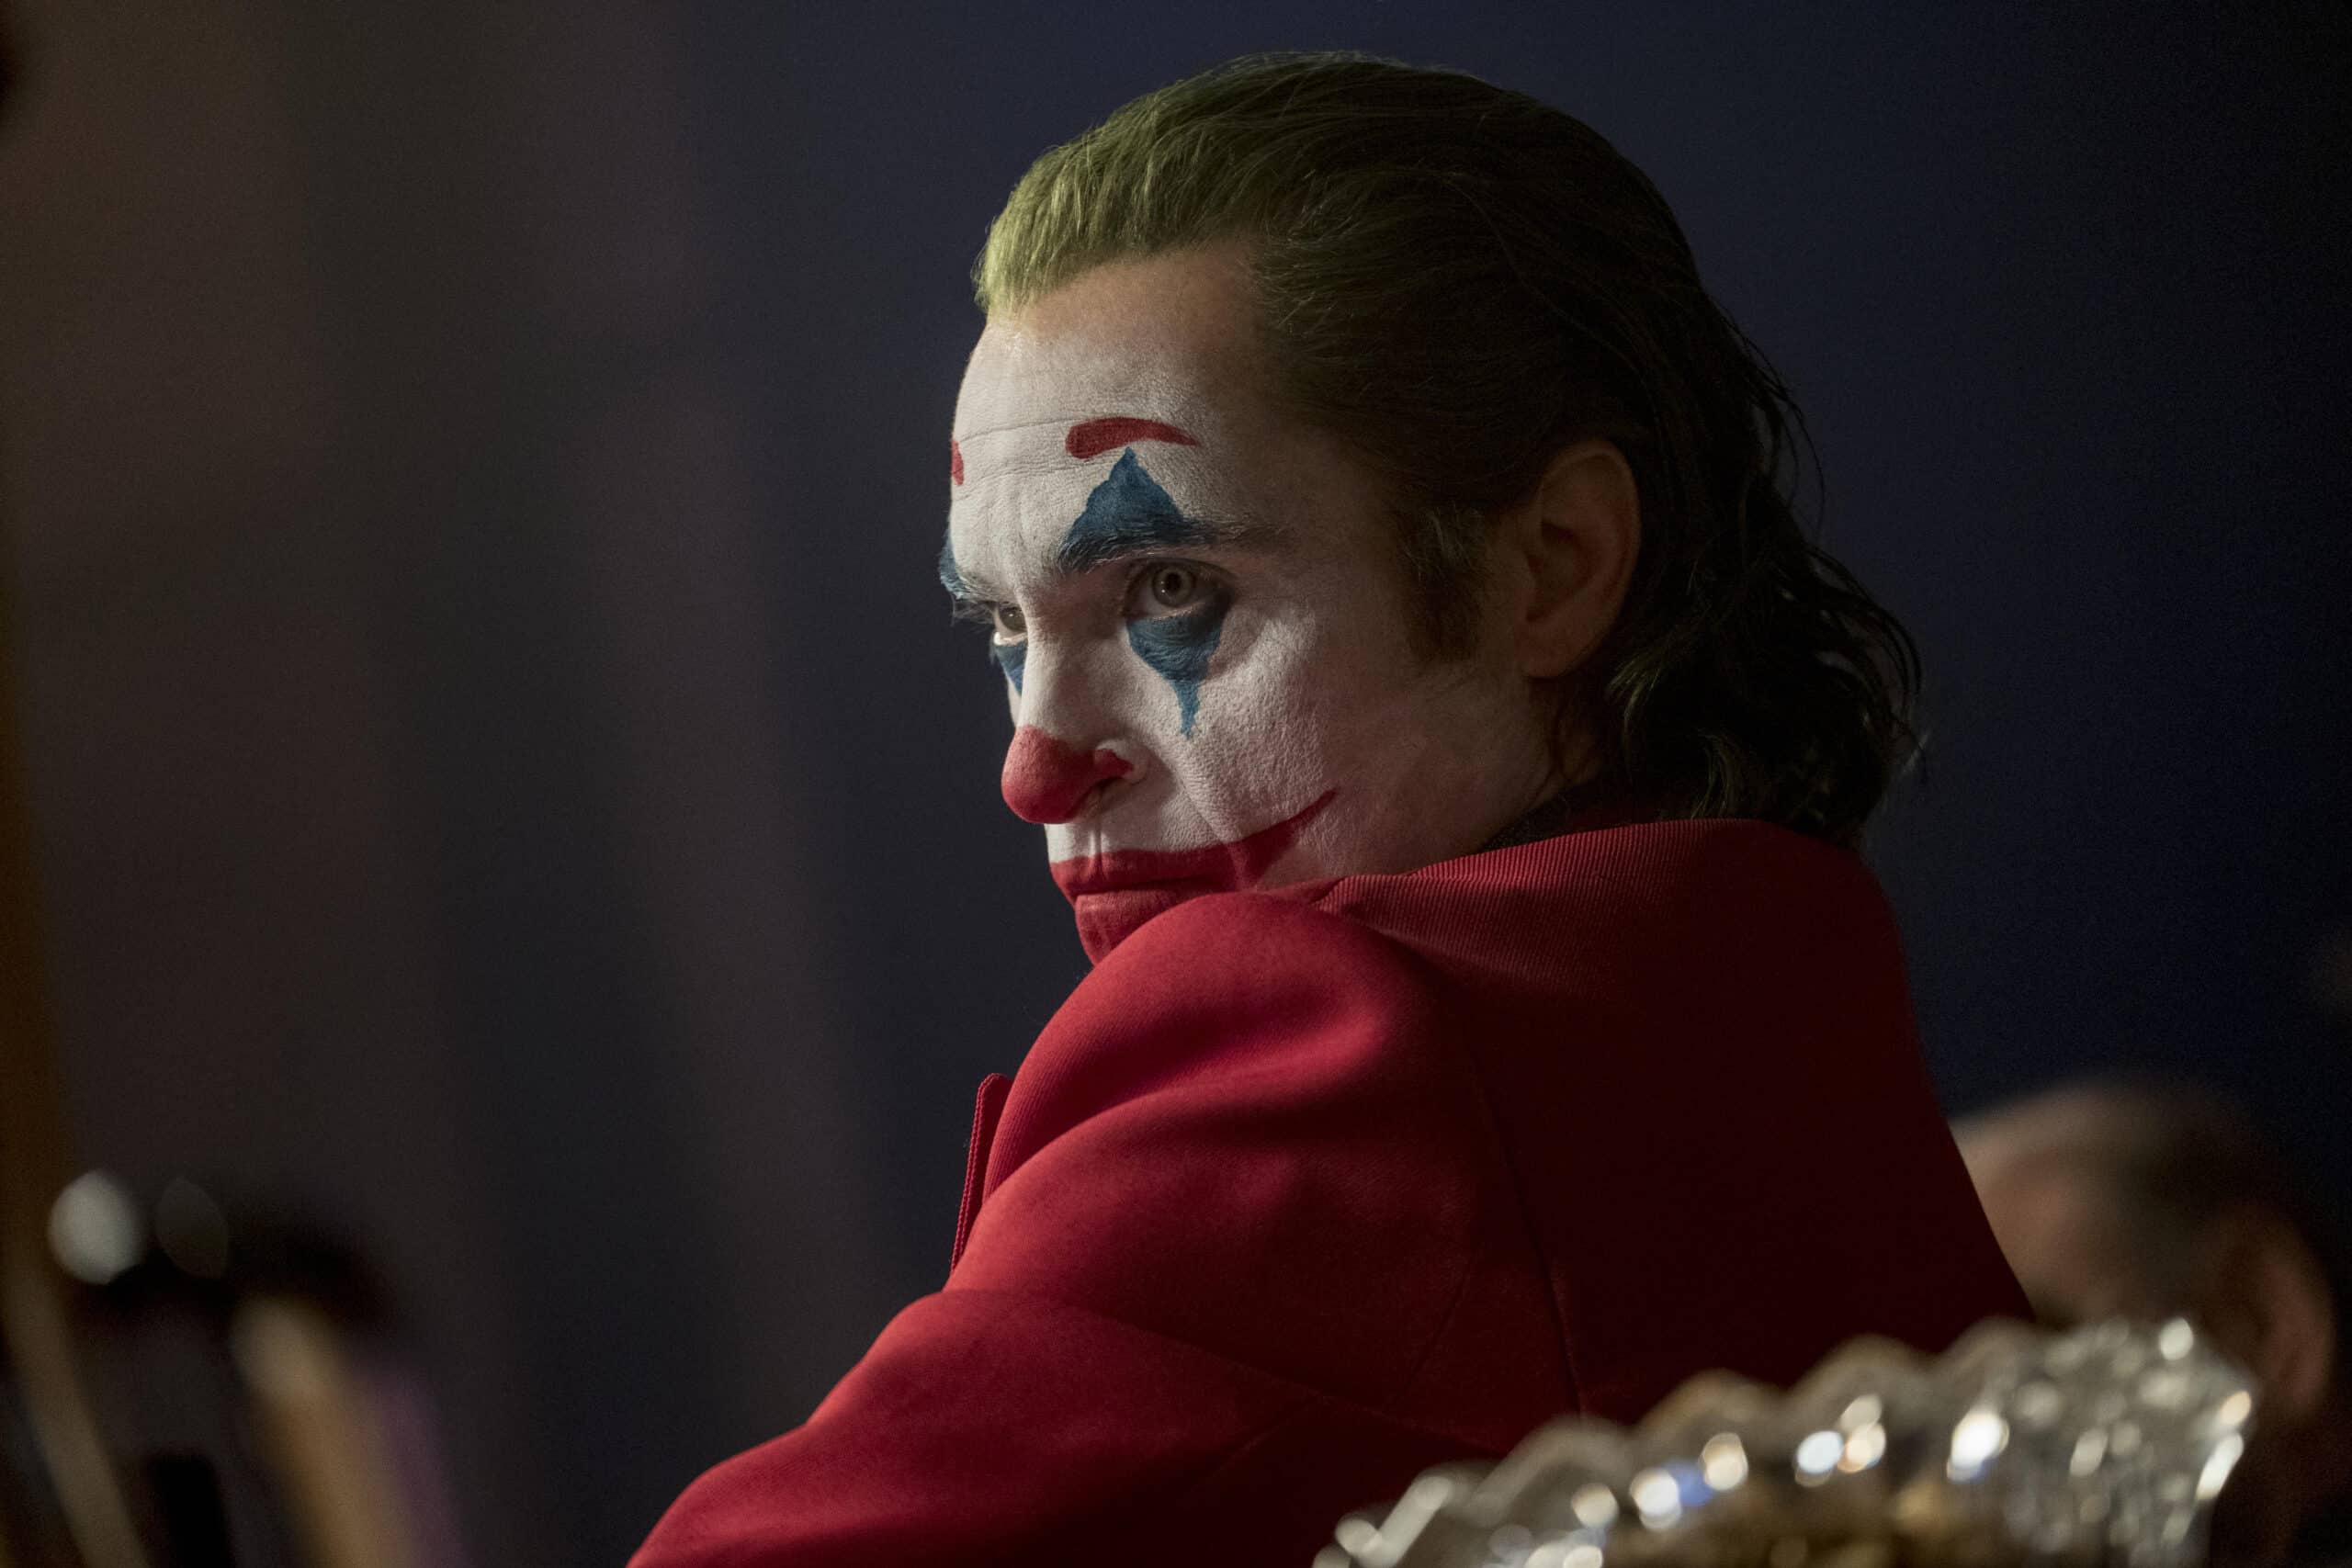 Joker 2: Warner Bros announces release date for part two